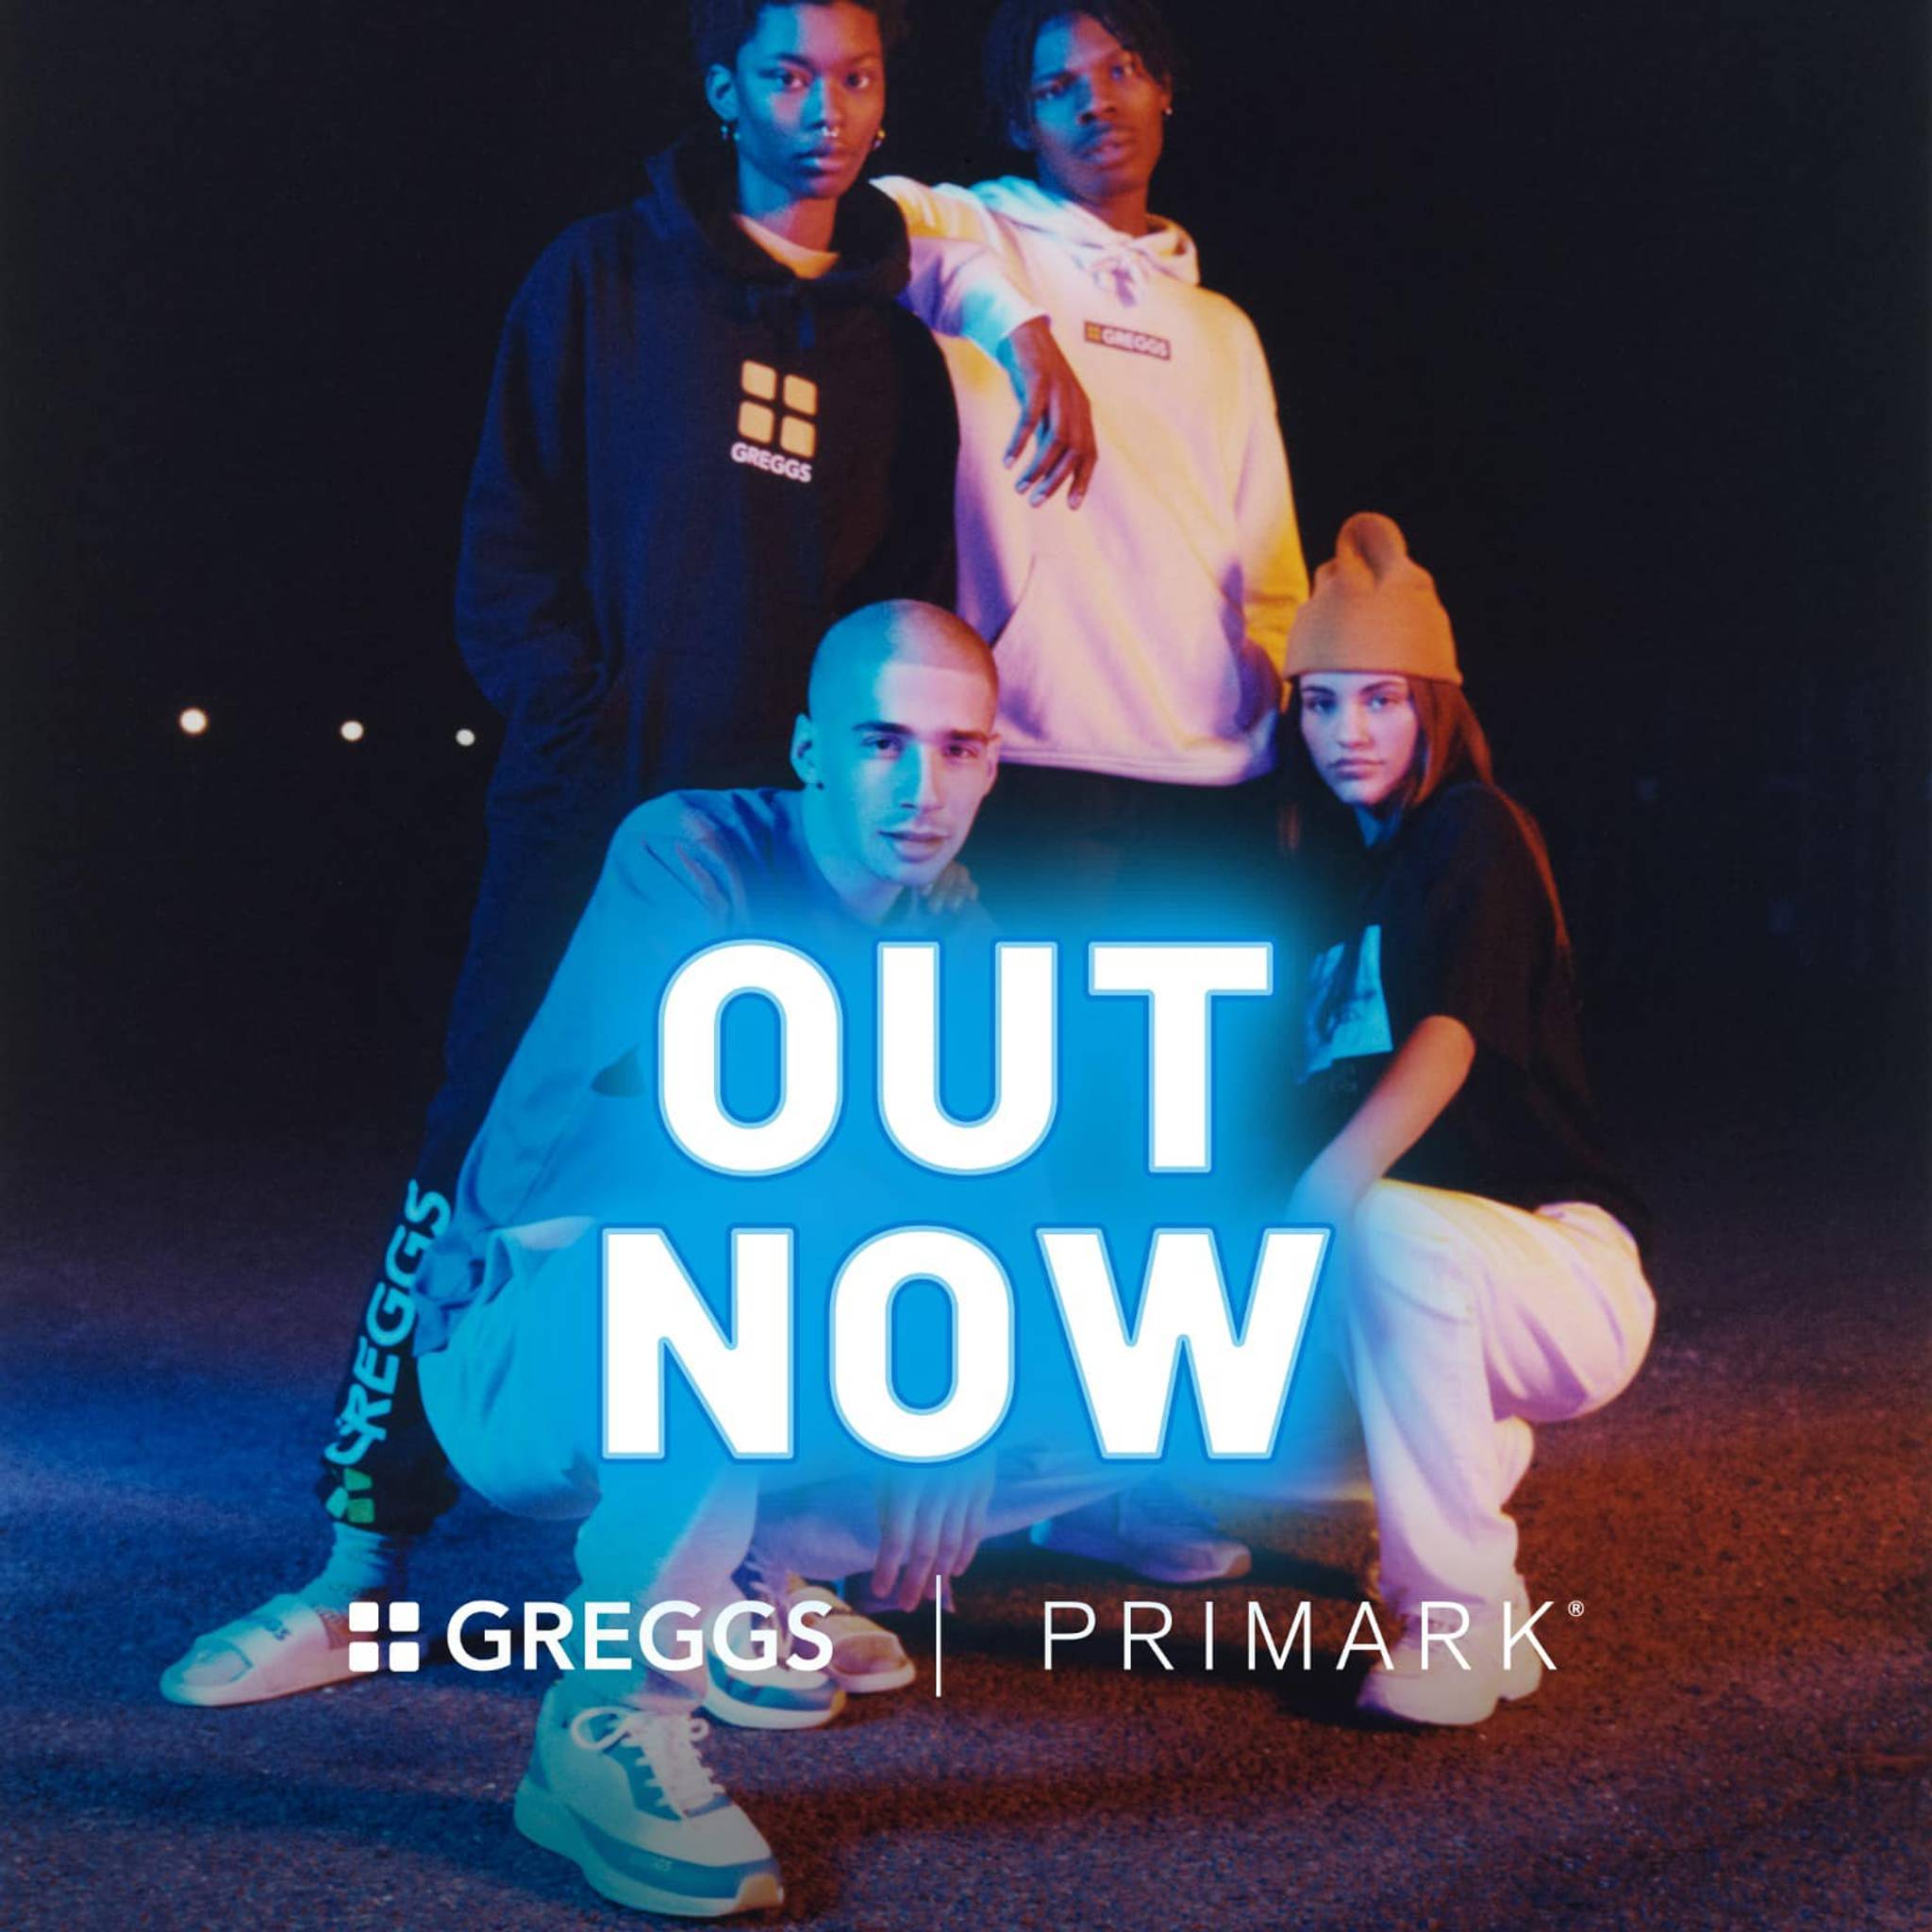 Greggs x Primark taps cult kitsch for social clout